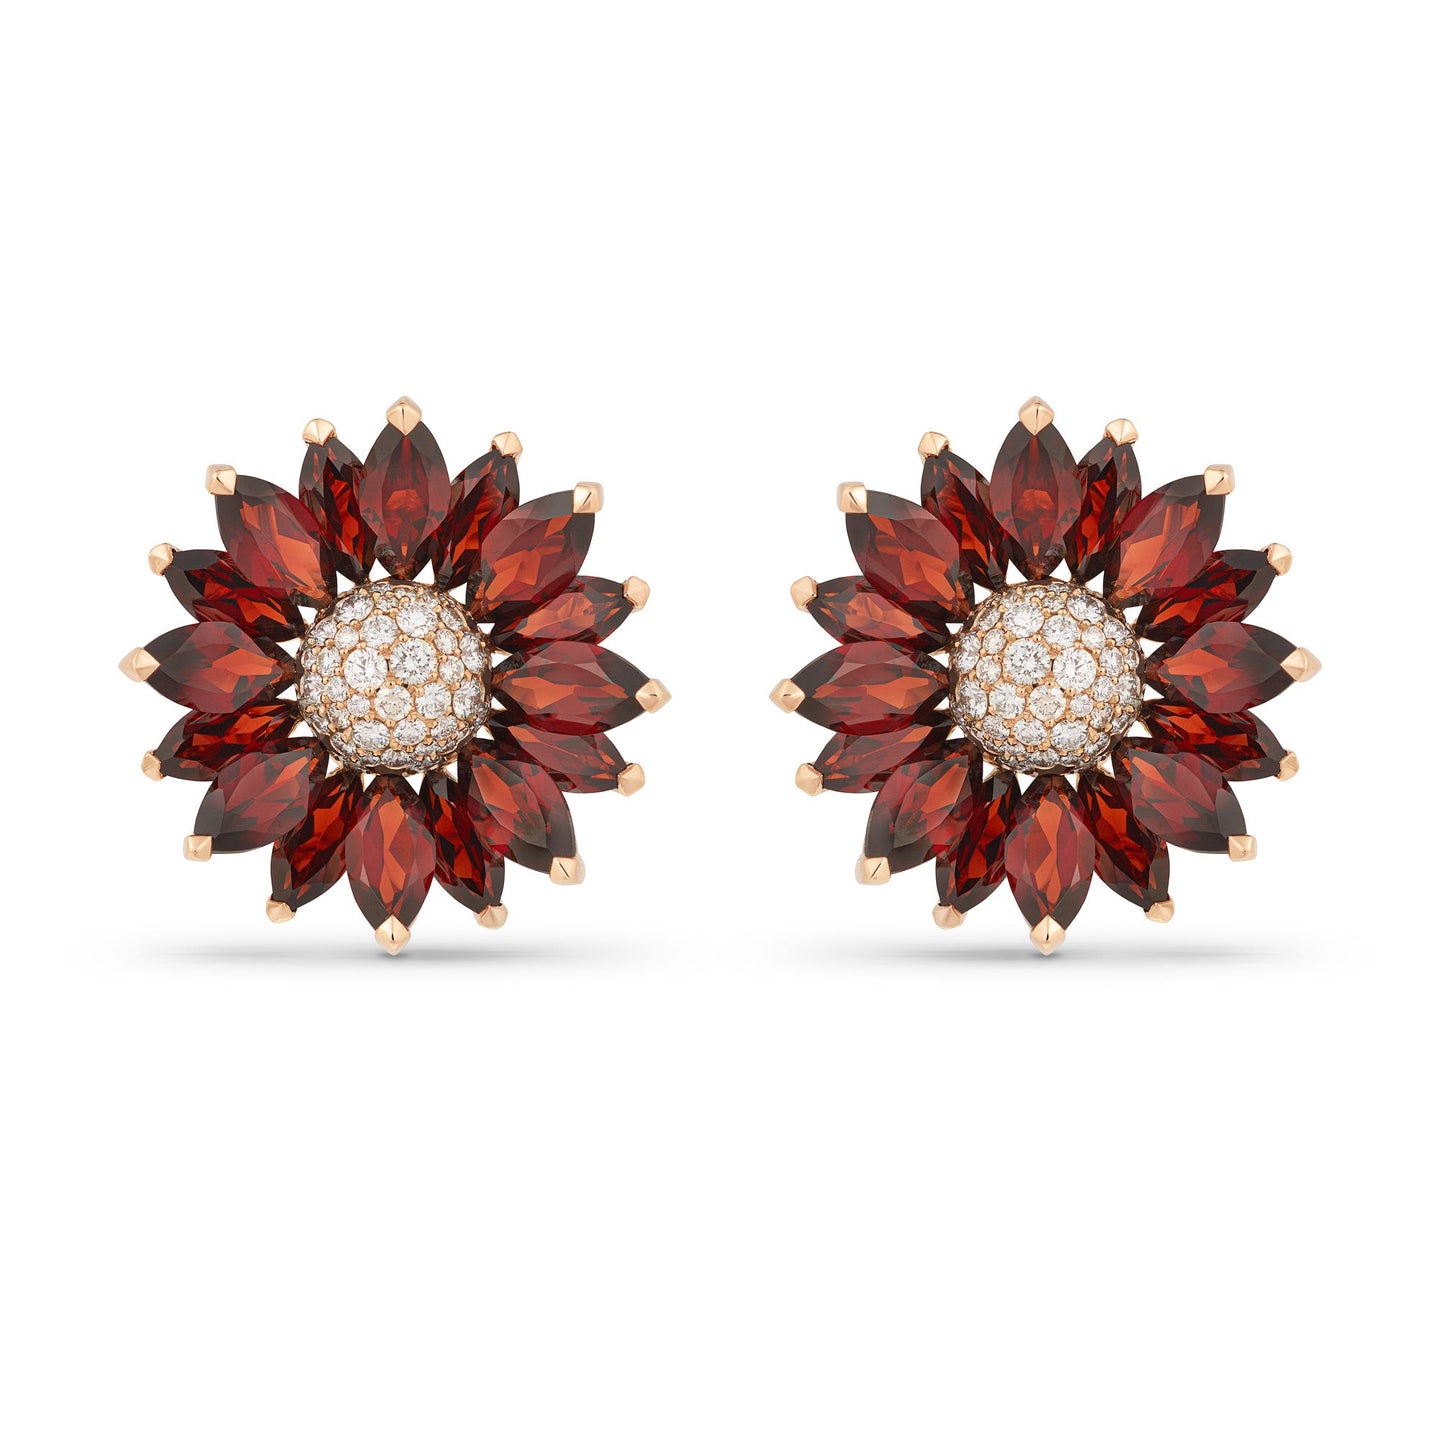 Daisy Medium Earrings in 18ct Rose Gold with Garnet and Diamonds